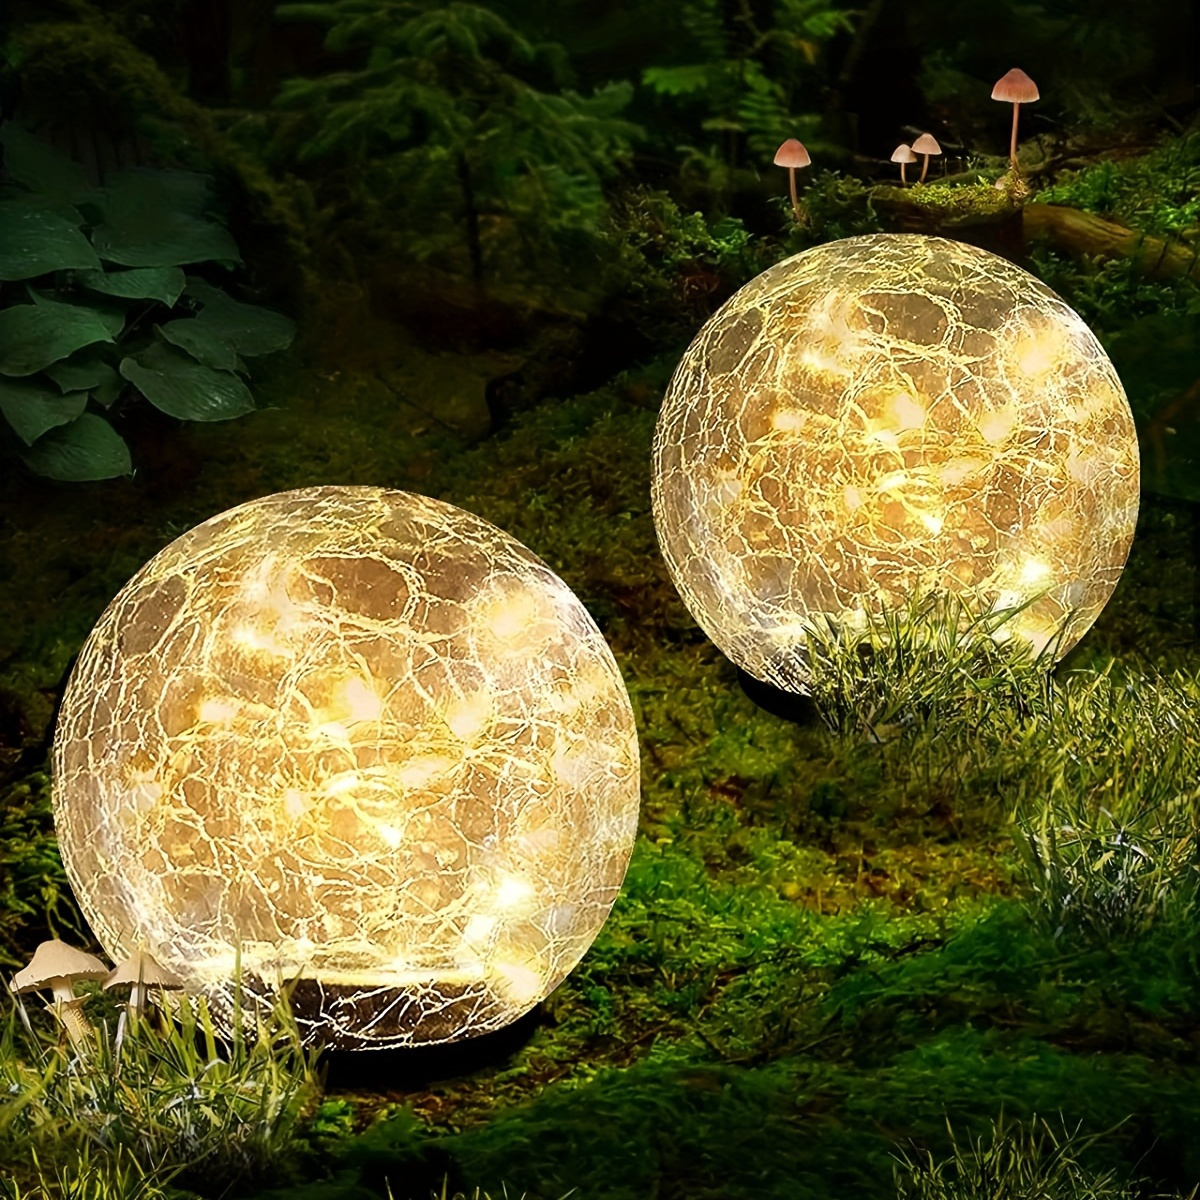 

Solar-powered Garden Lights - 3.9"/4.7" Cracked Glass Ball, Warm White Led For Outdoor Decor, Pathway, Patio, Yard & Lawn